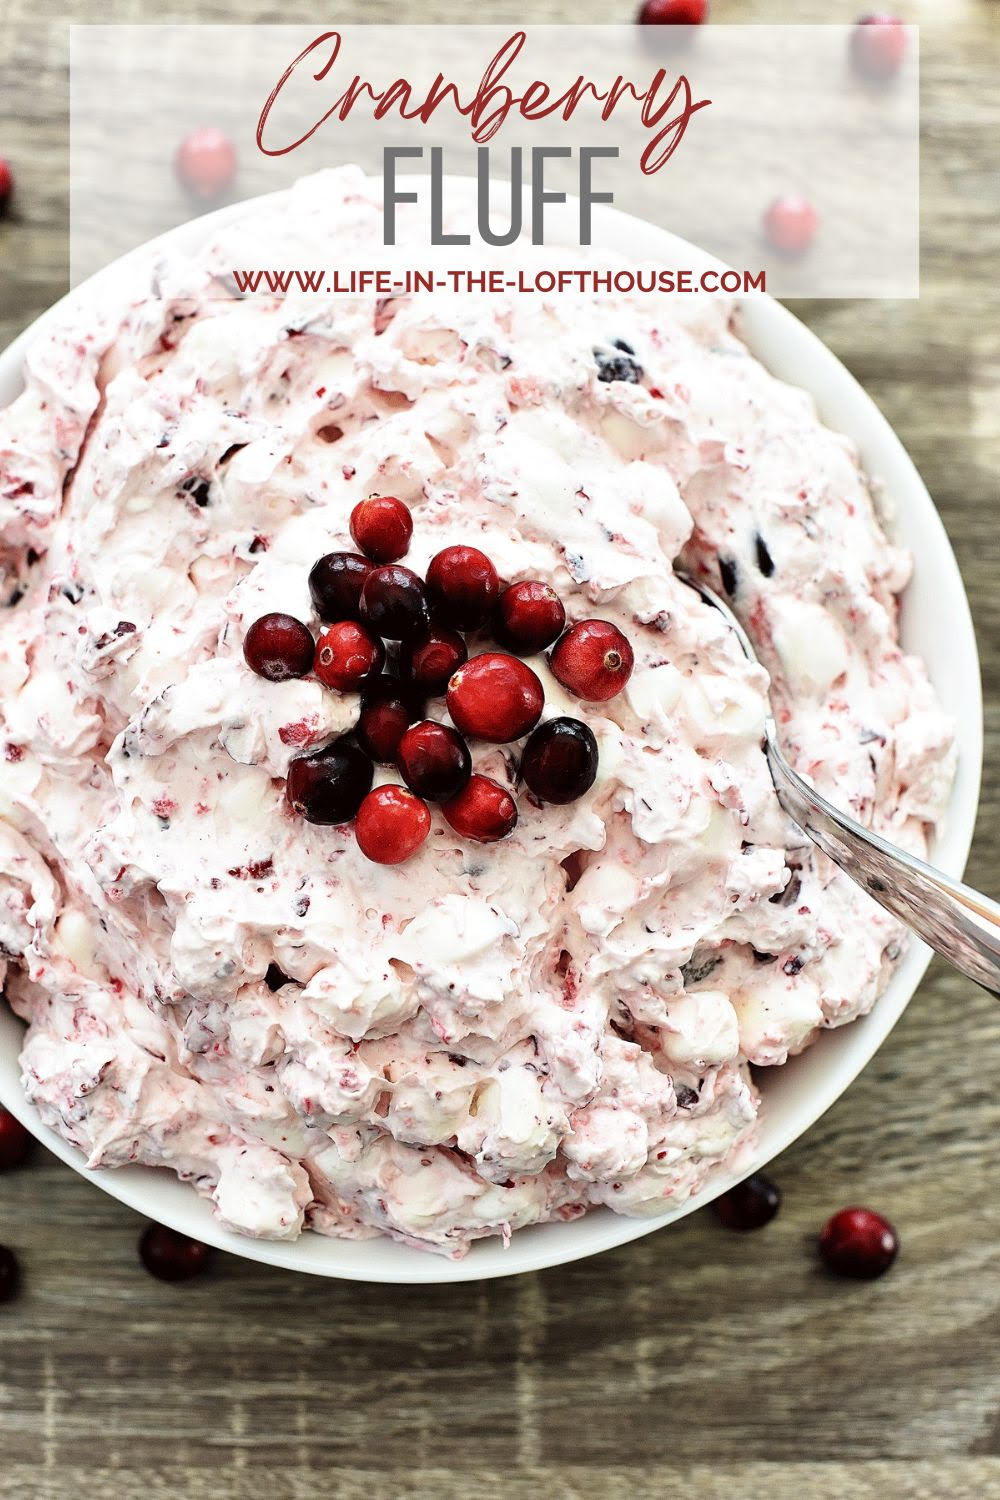 Cranberry Fluff is a creamy and sweet side dish filled with homemade whipped cream, cranberries, red grapes and marshmallows. Life-in-the-Lofthouse.com